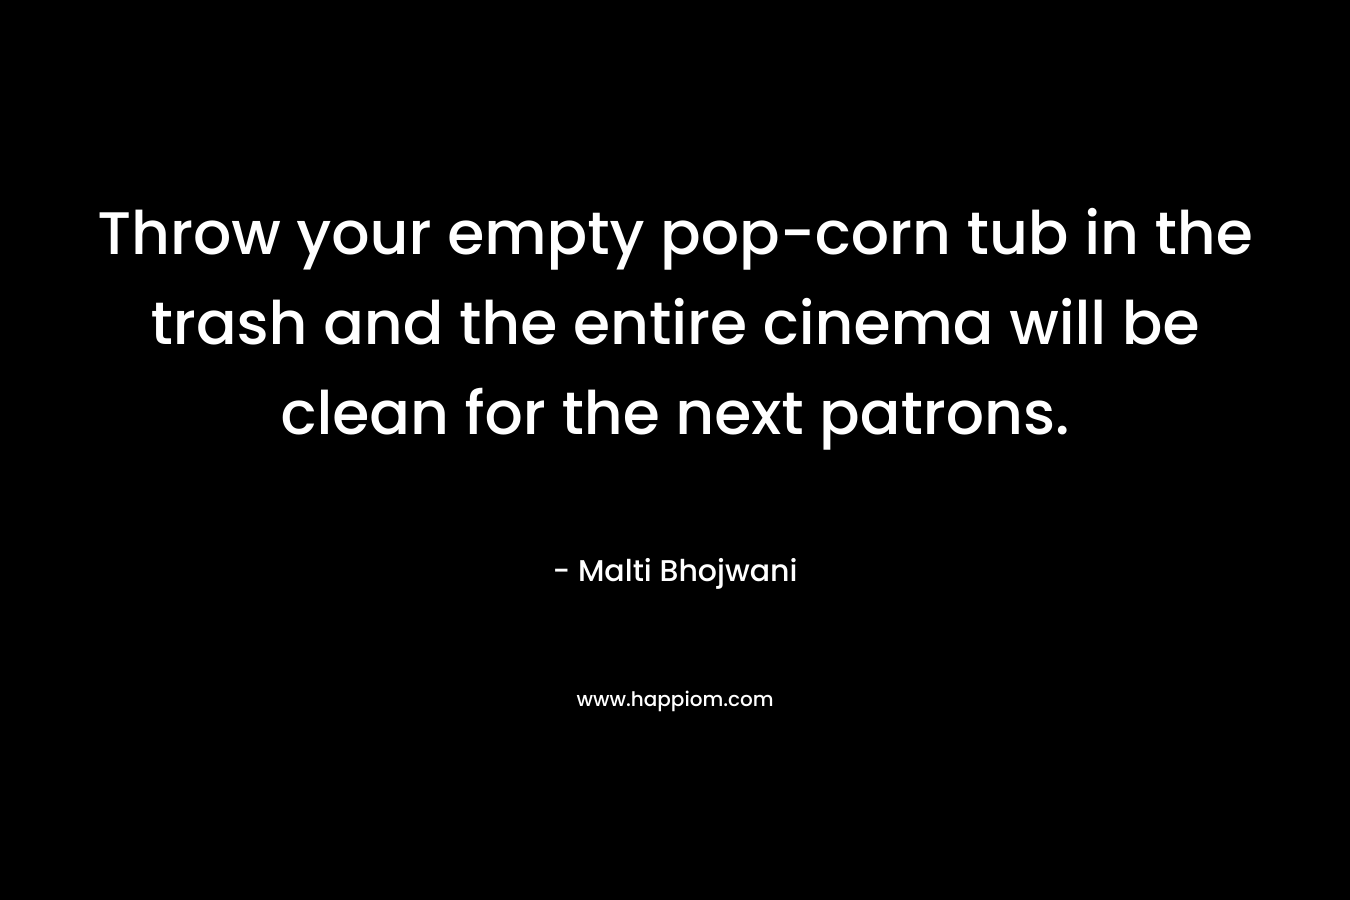 Throw your empty pop-corn tub in the trash and the entire cinema will be clean for the next patrons. – Malti Bhojwani